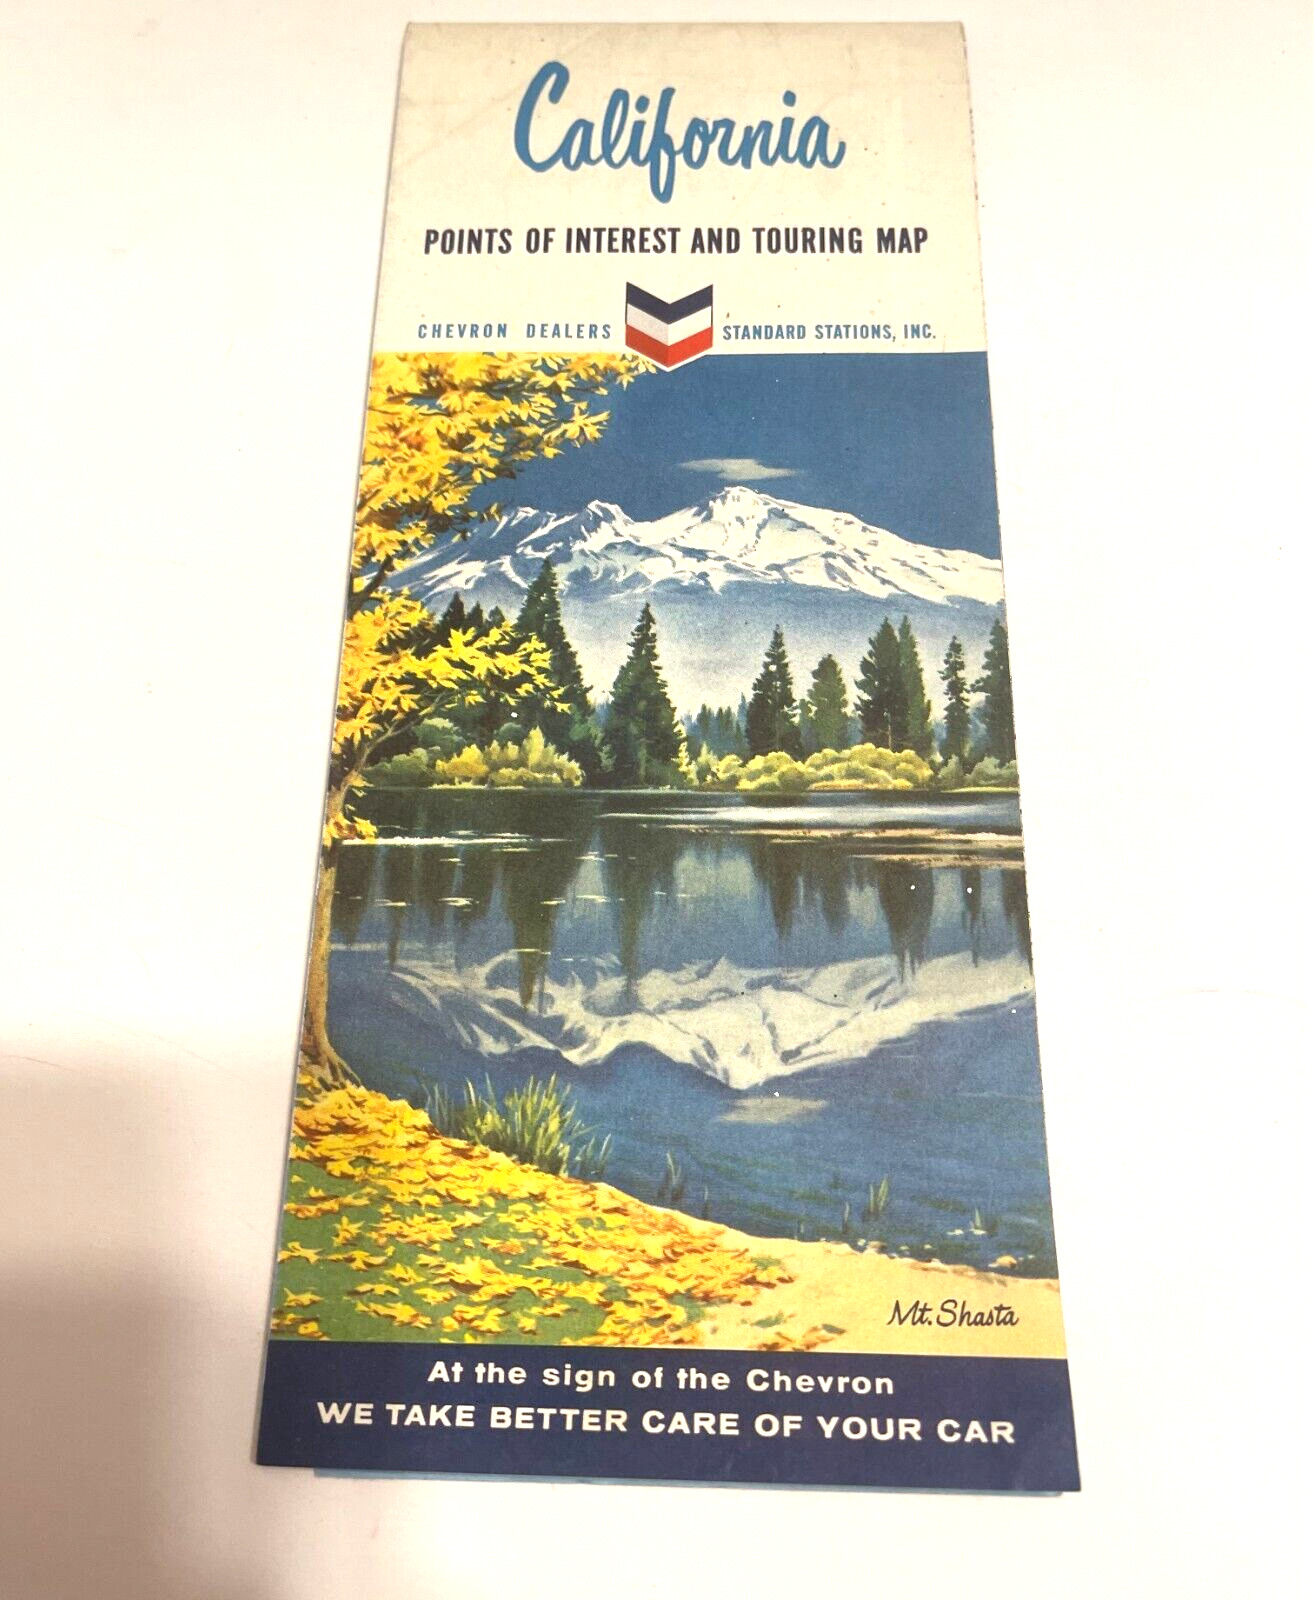 Vintage 1963 Chevron Standard Stations California Points of Interest Touring Map